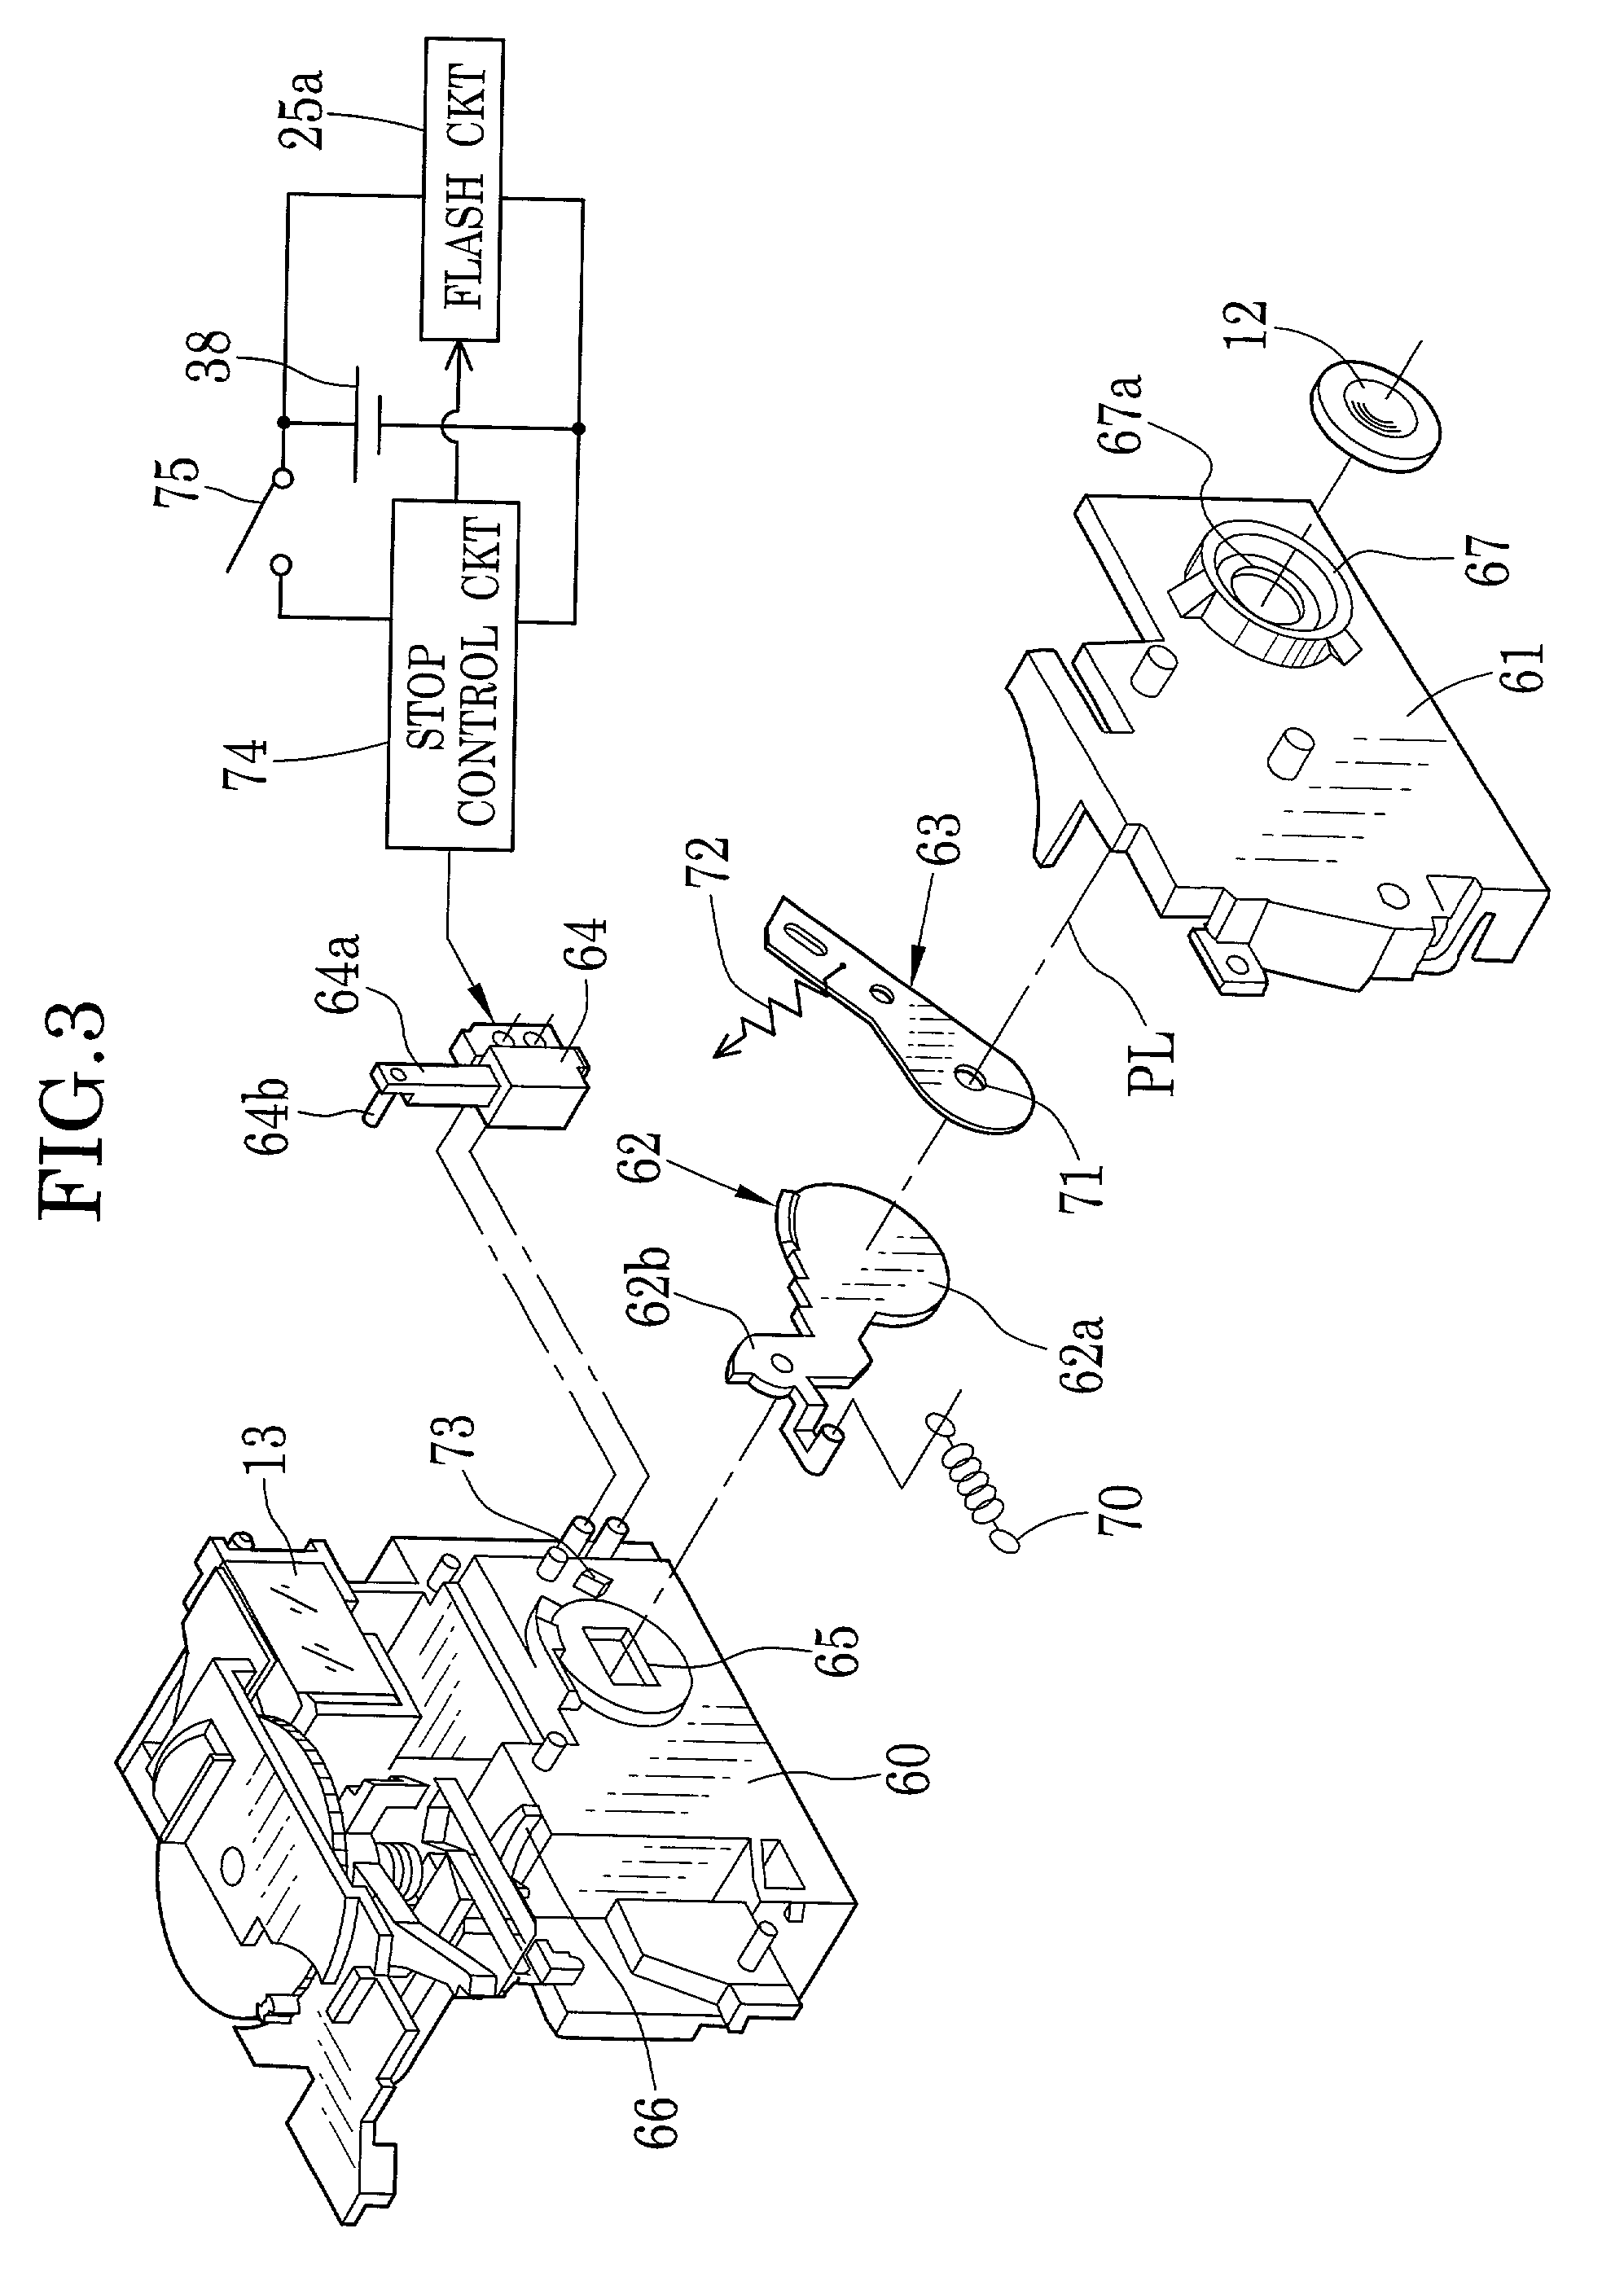 Automatic exposure control device for a camera